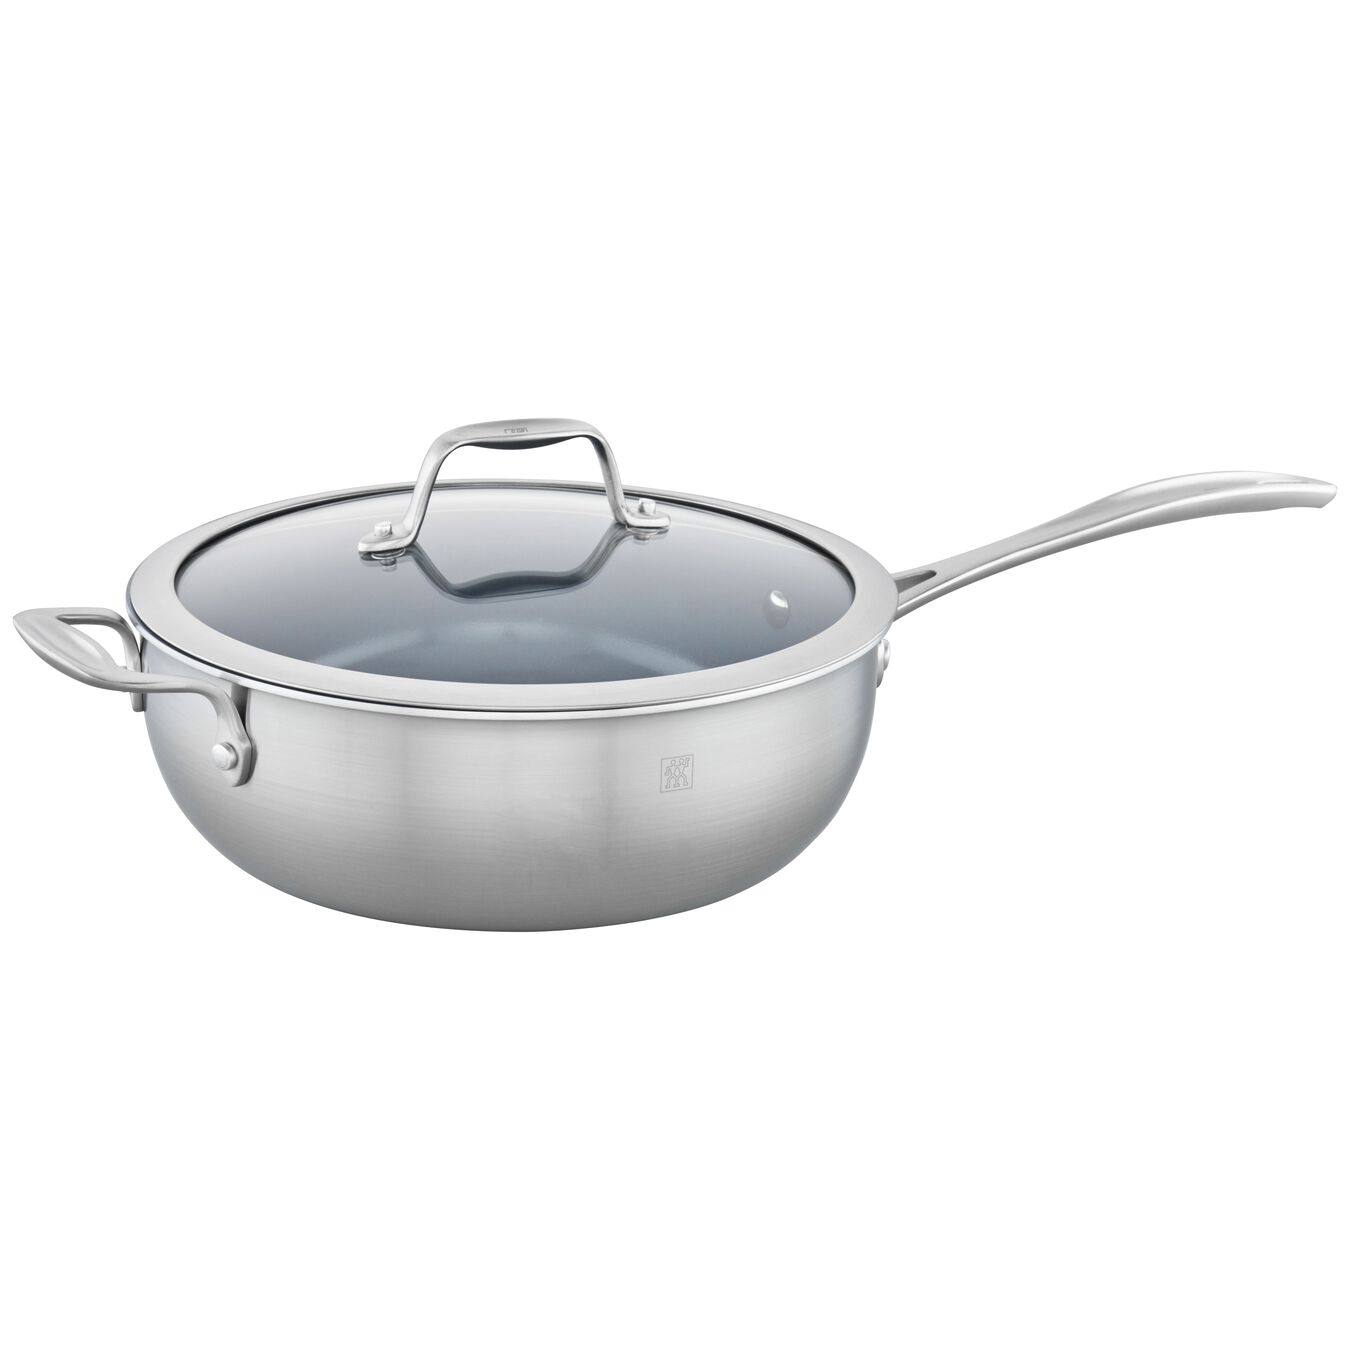 25 cm 18/10 Stainless Steel Saute pan,,large 2